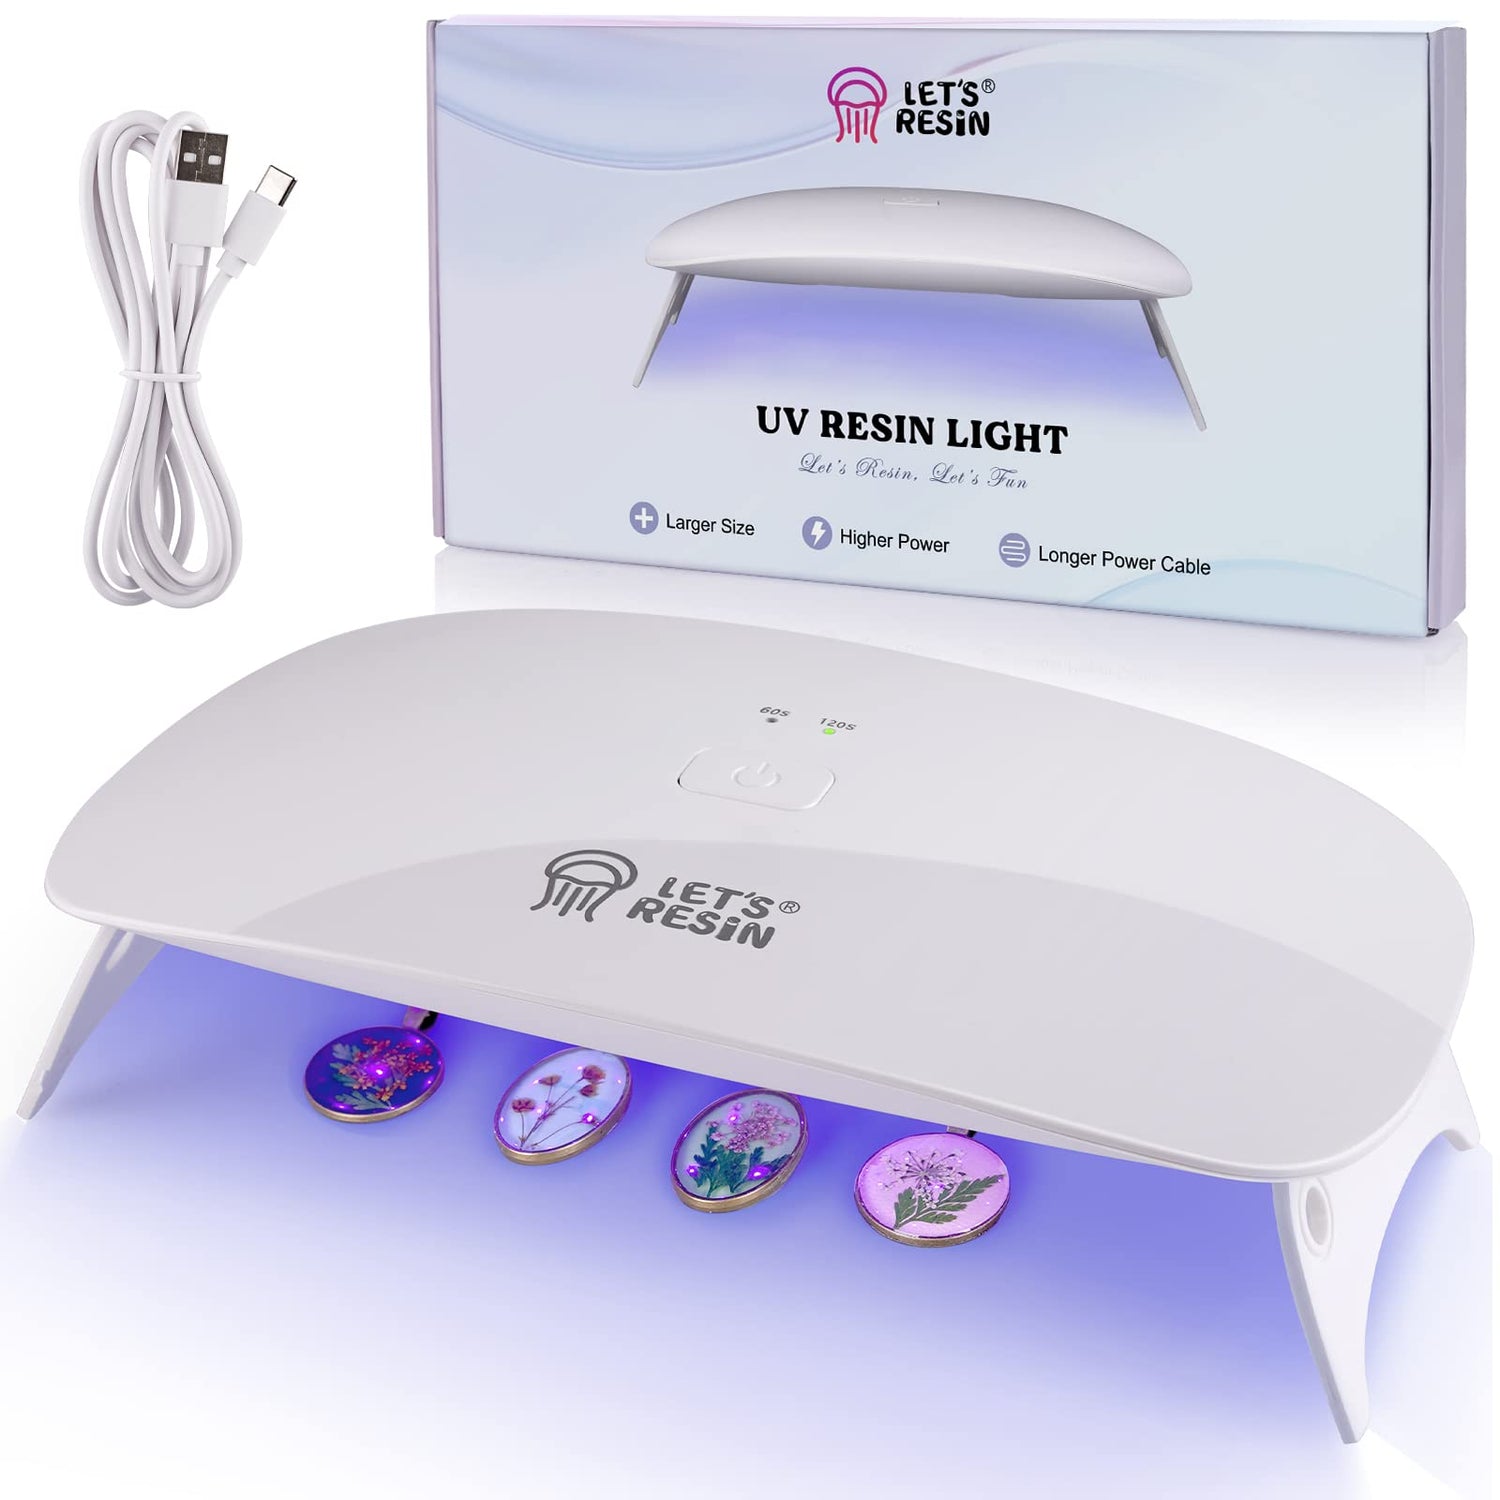 UV Resin LED Curing Lamp with USB Cable